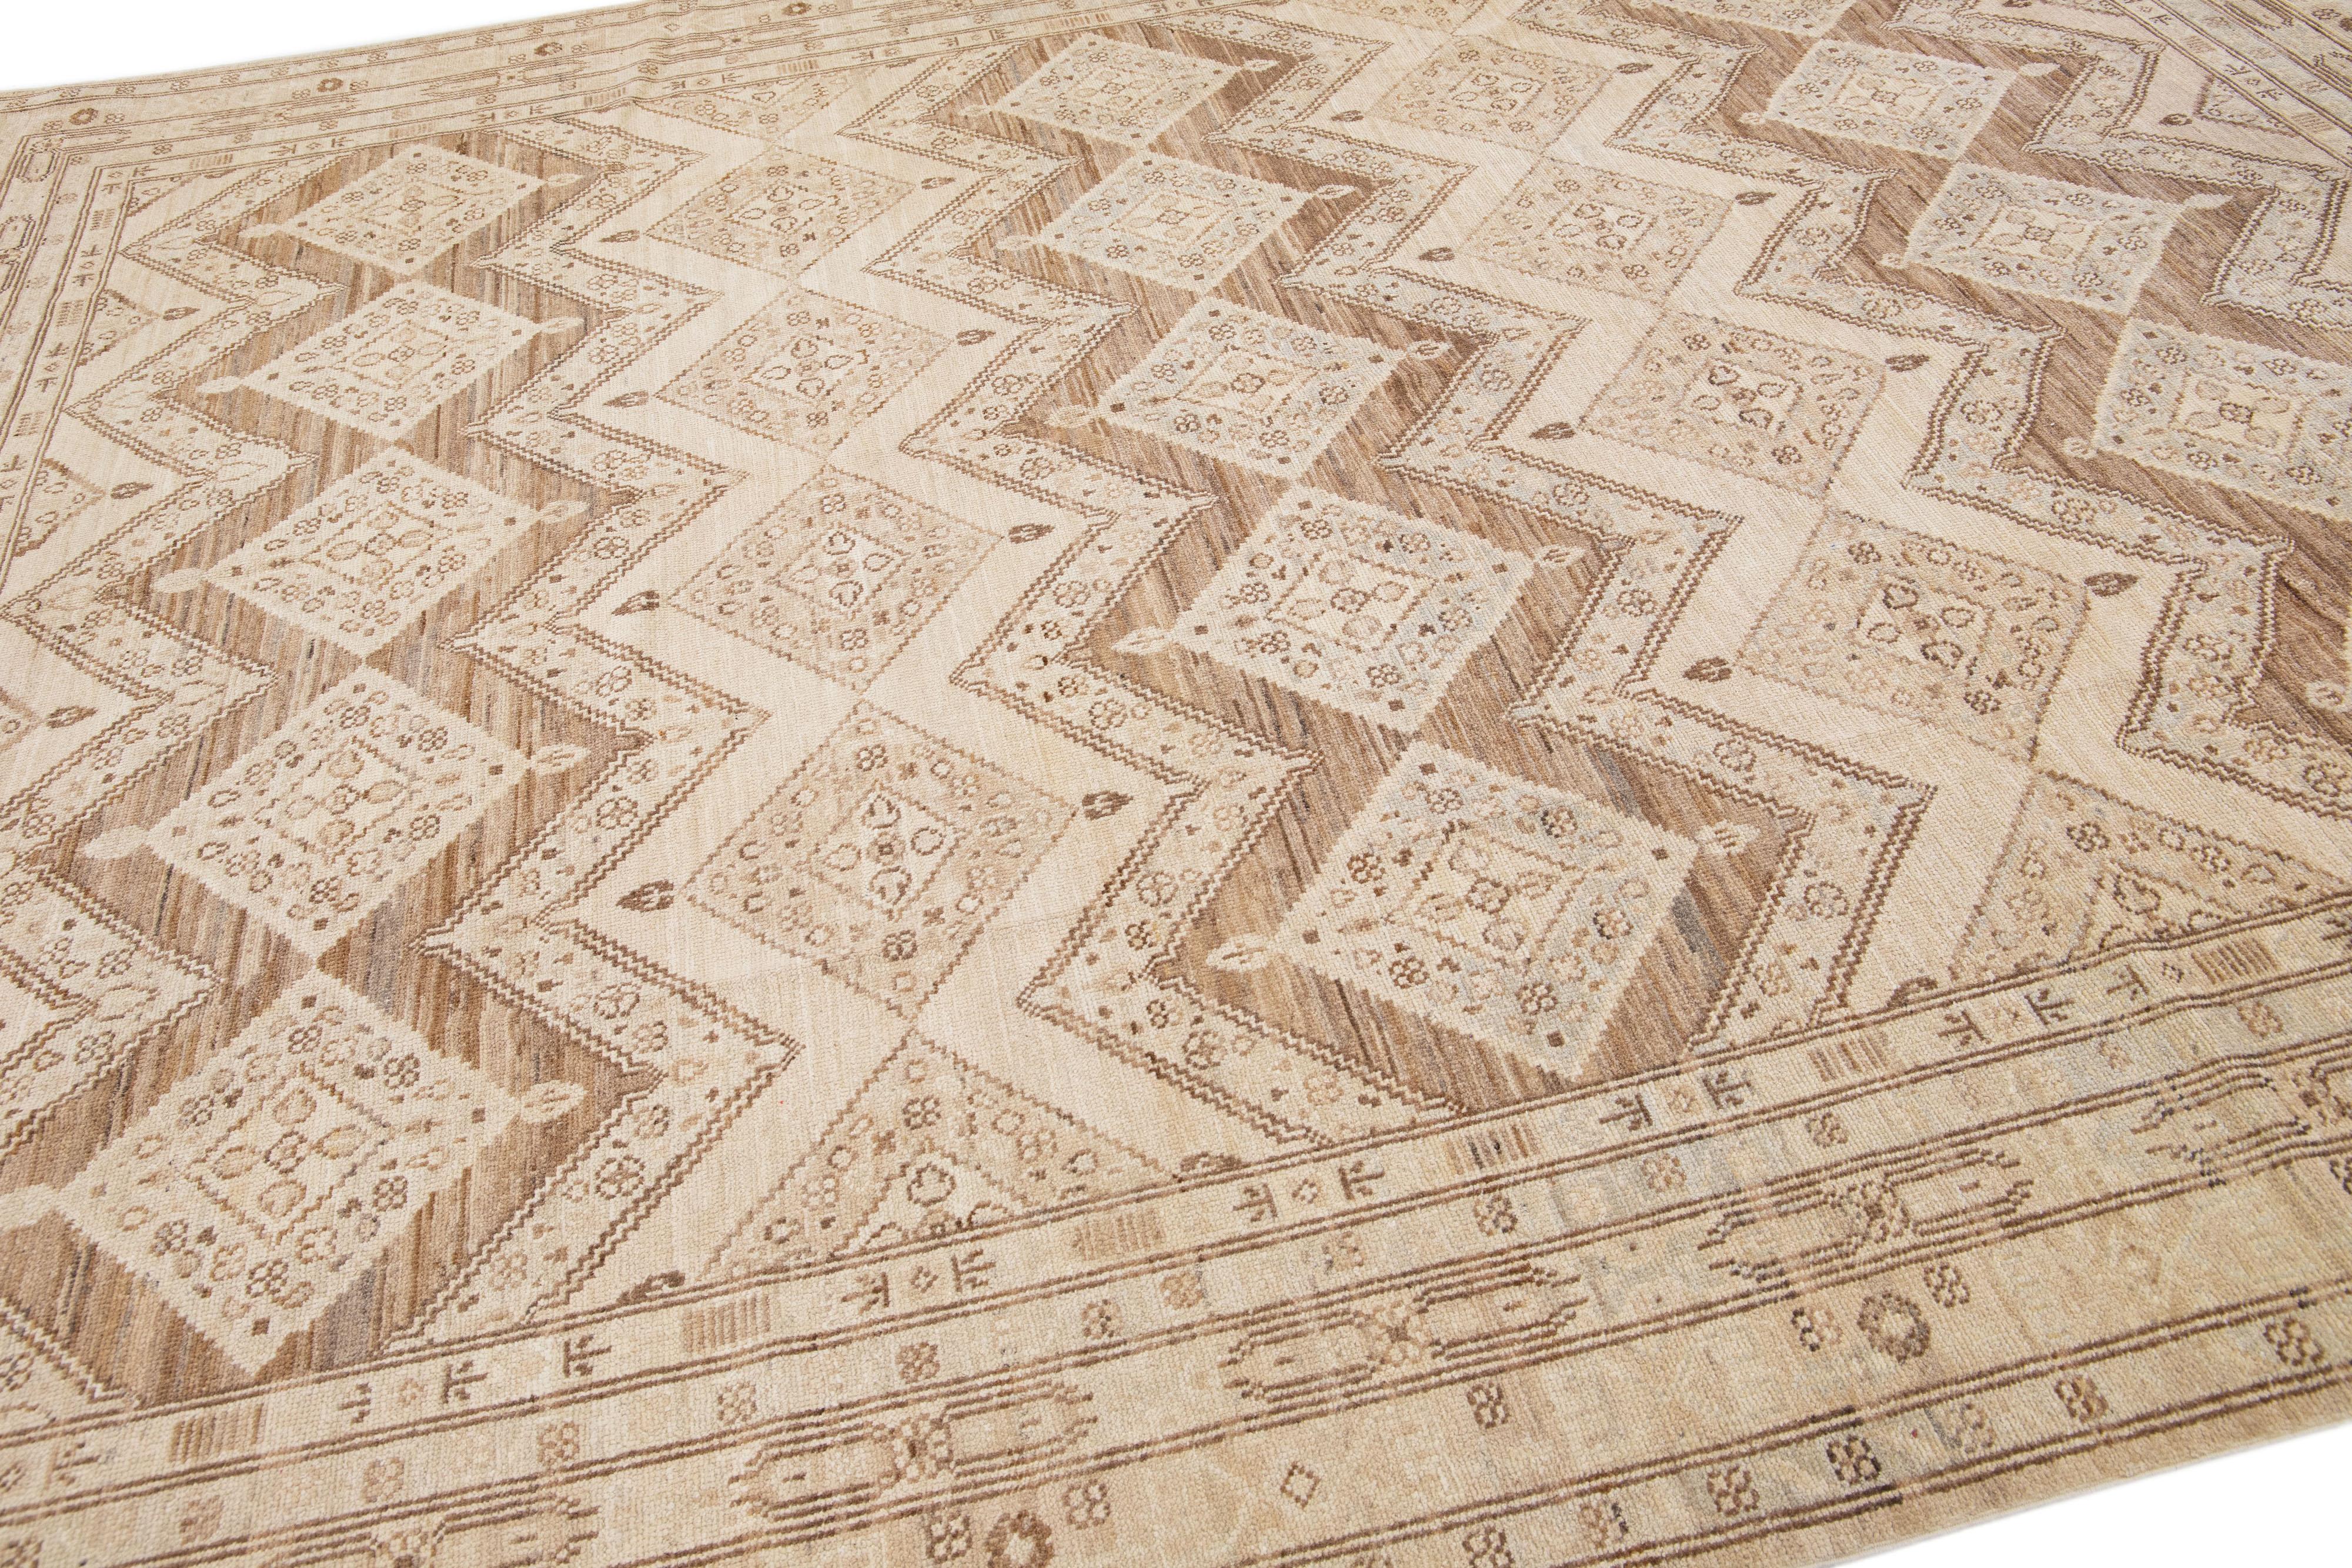 Beautiful modern Persian style Indian hand-knotted wool rug with a beige color field with brown and gray accents on a Classic geometric floral design.

This rug measures 9'7